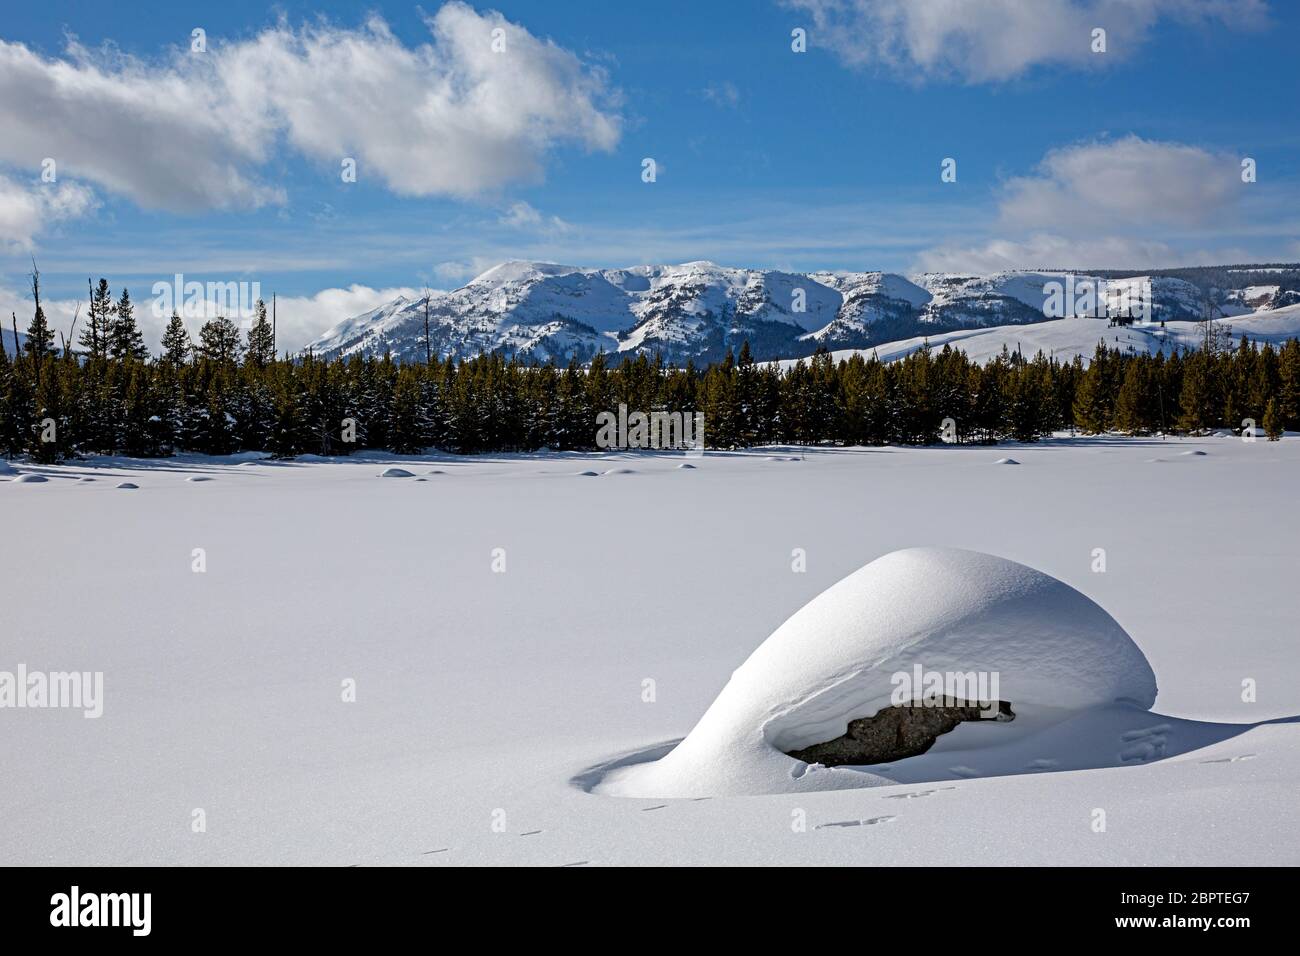 WY04488-00....WYOMING - Snow covered pond and the Gallitan Range from the Bunsen Peak Ski Trail in Yellowstone National Park. Stock Photo